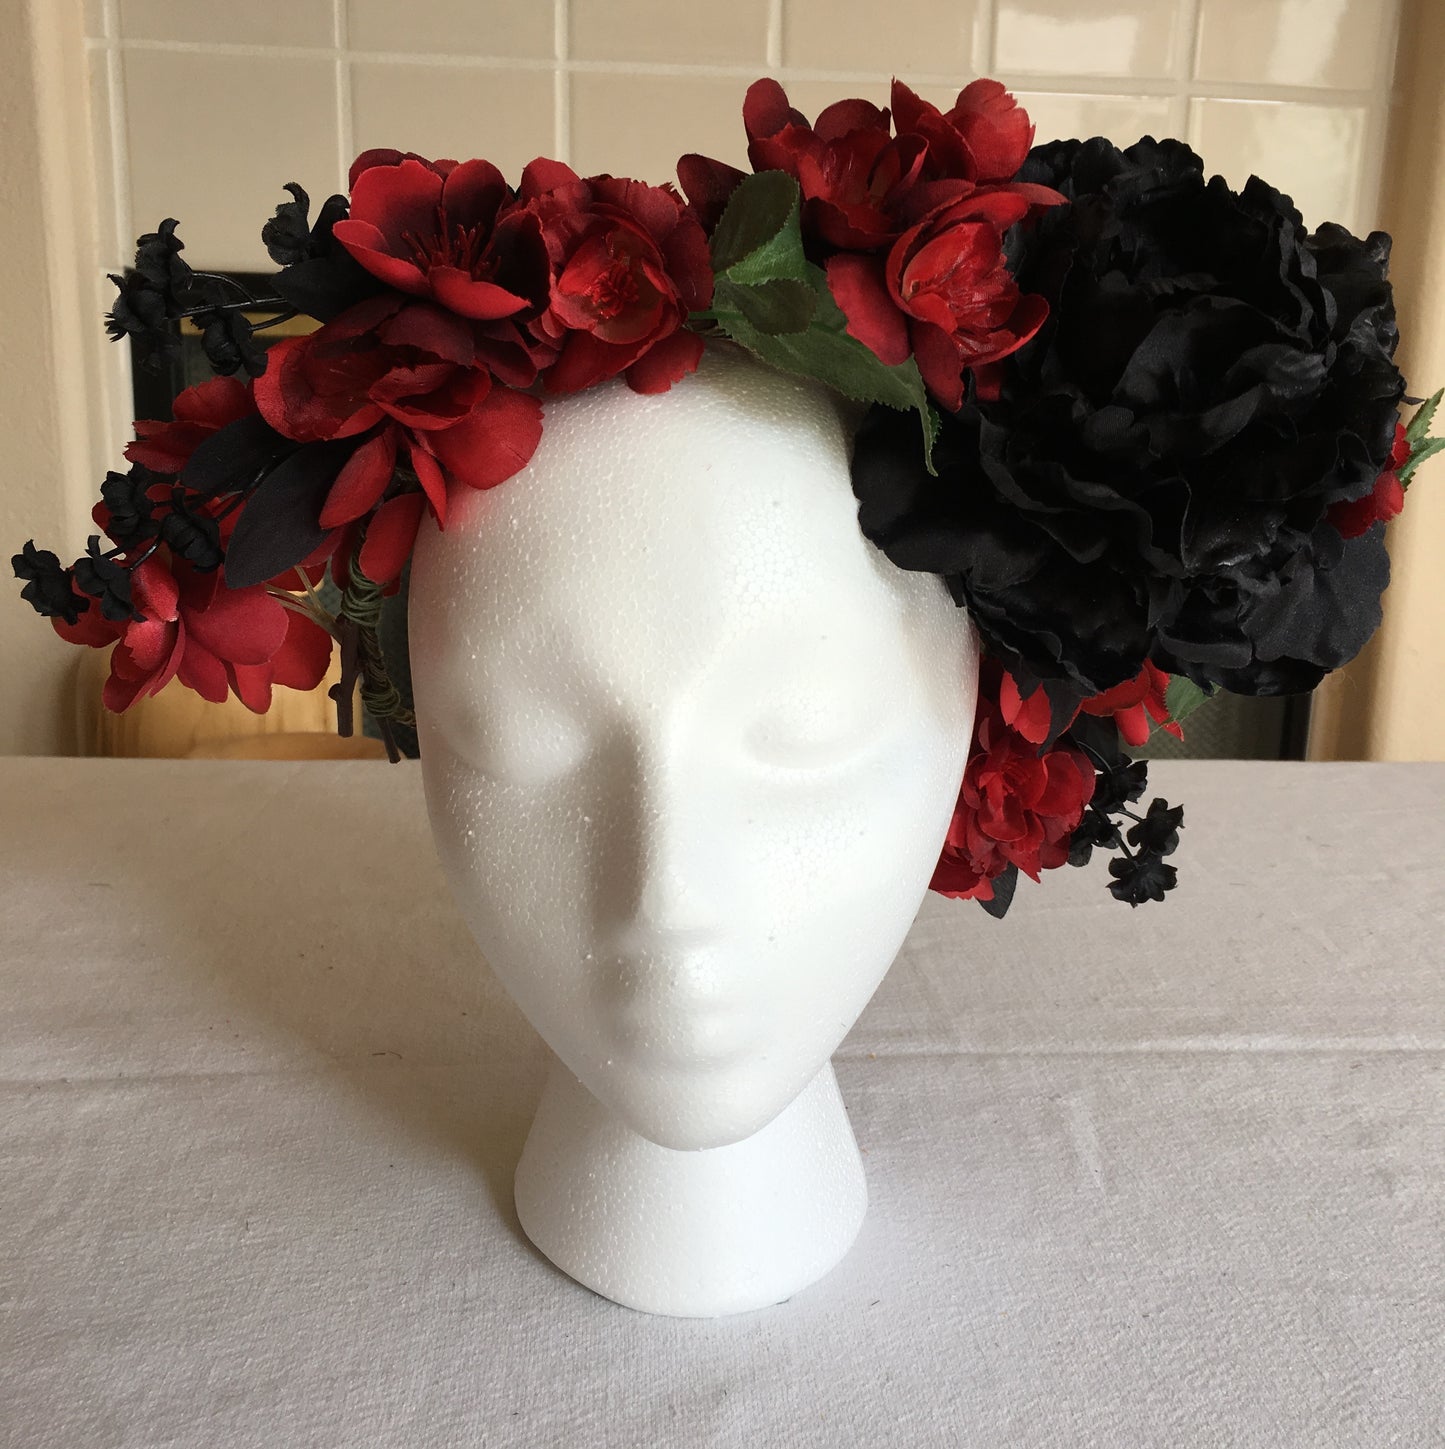 Large Wreath - Black flower w/ red cherry blossoms